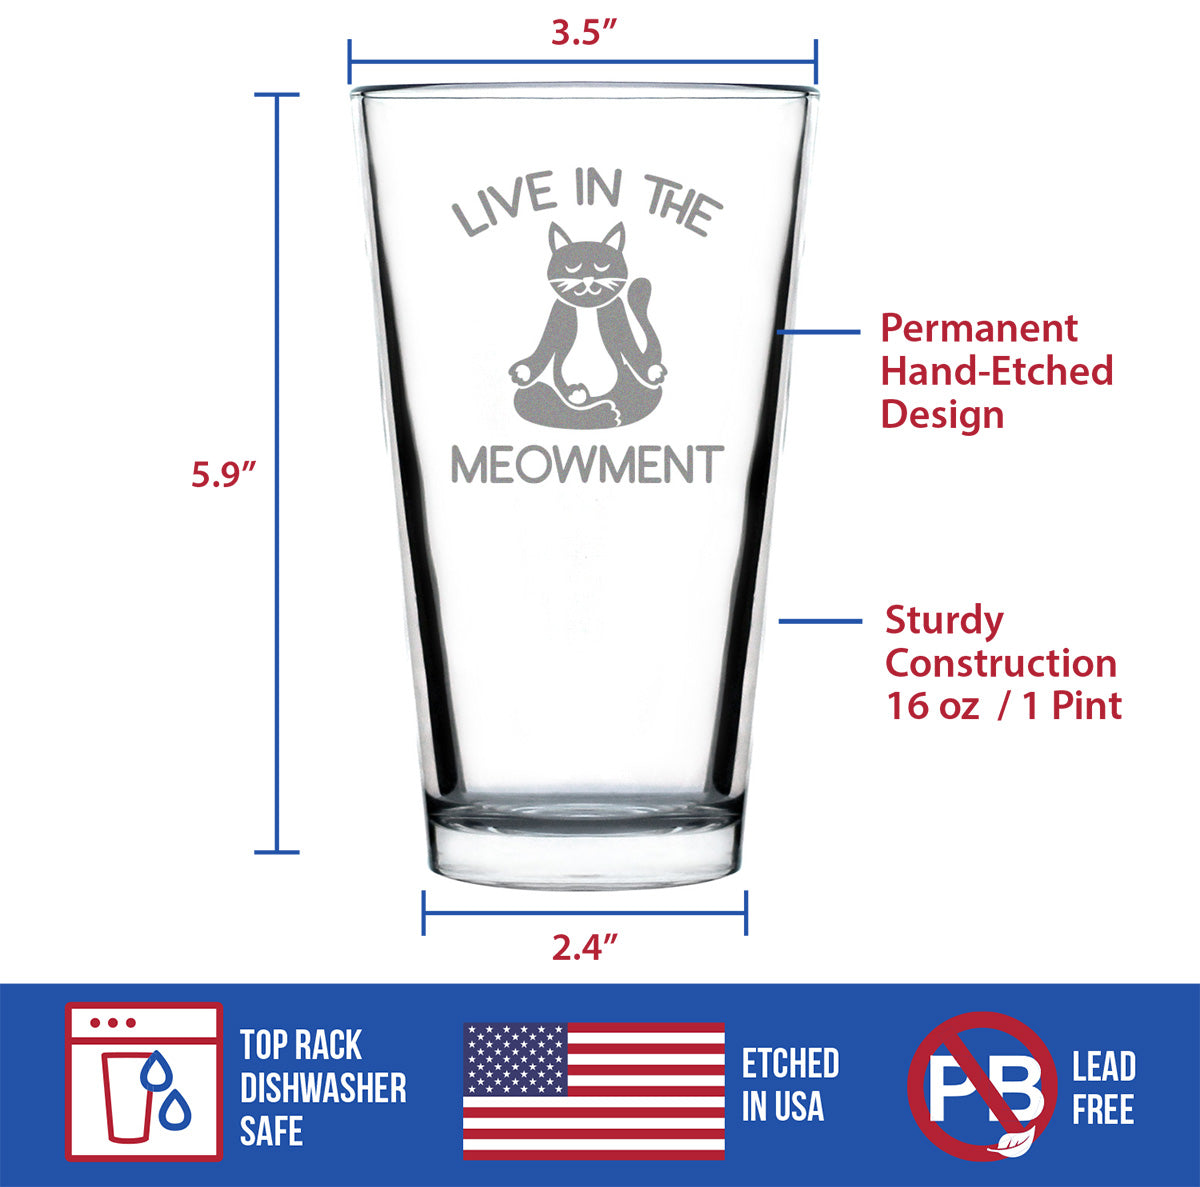 Live In The Meowment - Pint Glass for Beer - Funny Cat Gifts and Meditation Themed Decor - 16 oz Glasses